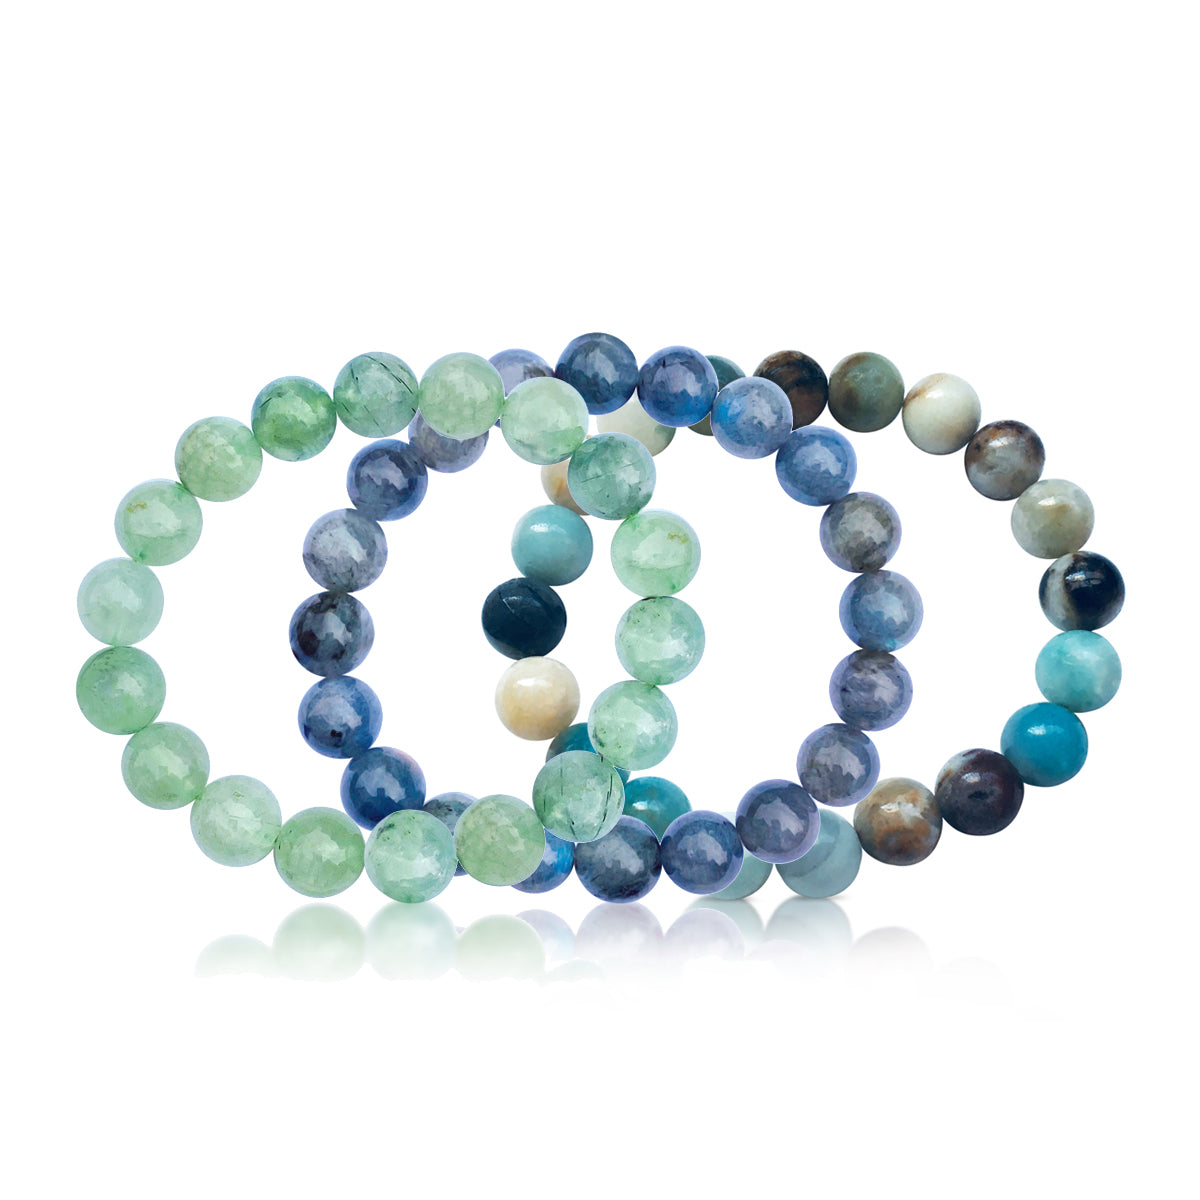 Labradorite, Prehnite and Amazonite Bracelet Trio to Assists in Dealing with Feelings of Constant Change in Our Lives. 